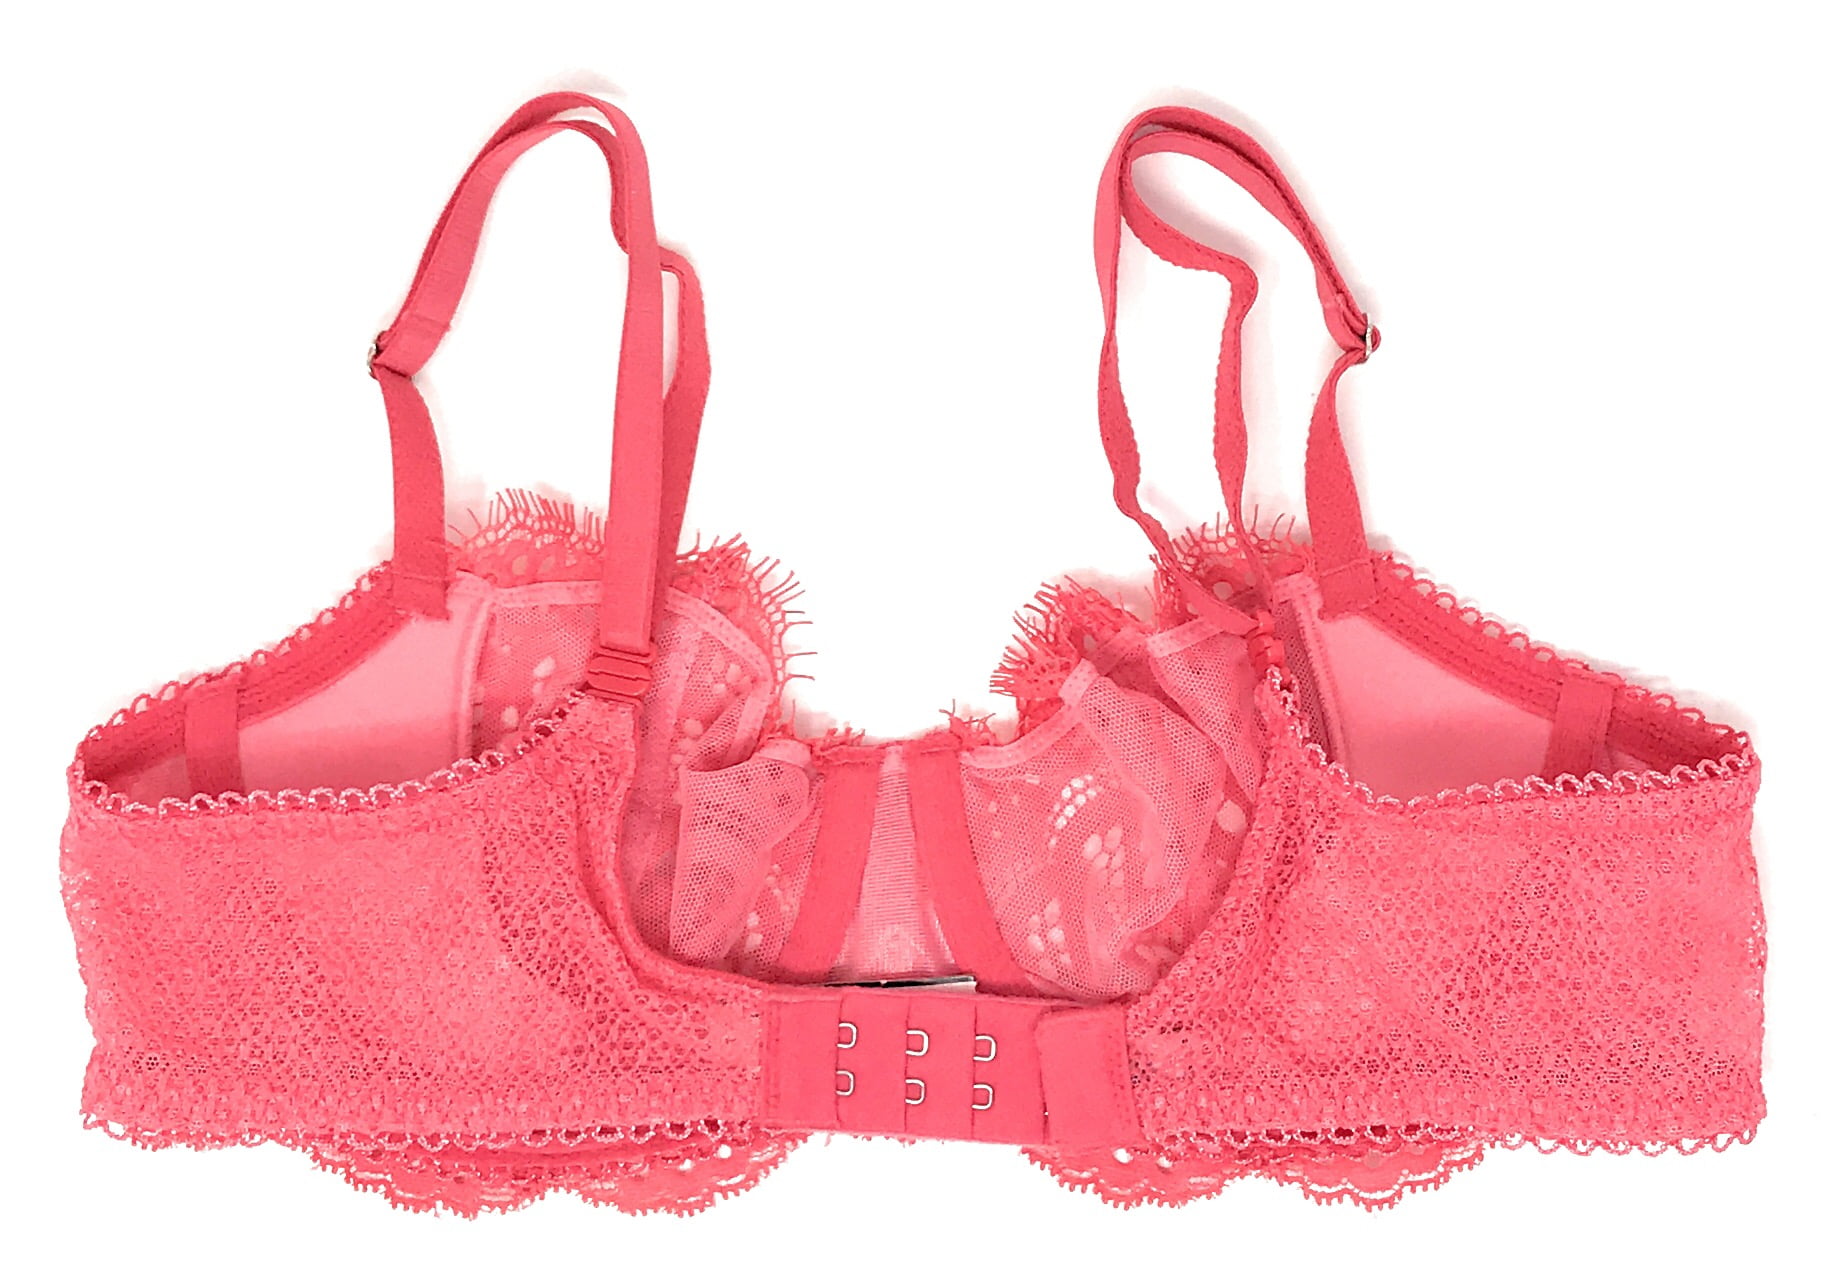 Victoria's Secret Dream Angels Push Up Without Padding Pastel Pink Bra,  34DDD Size undefined - $25 - From Jessica